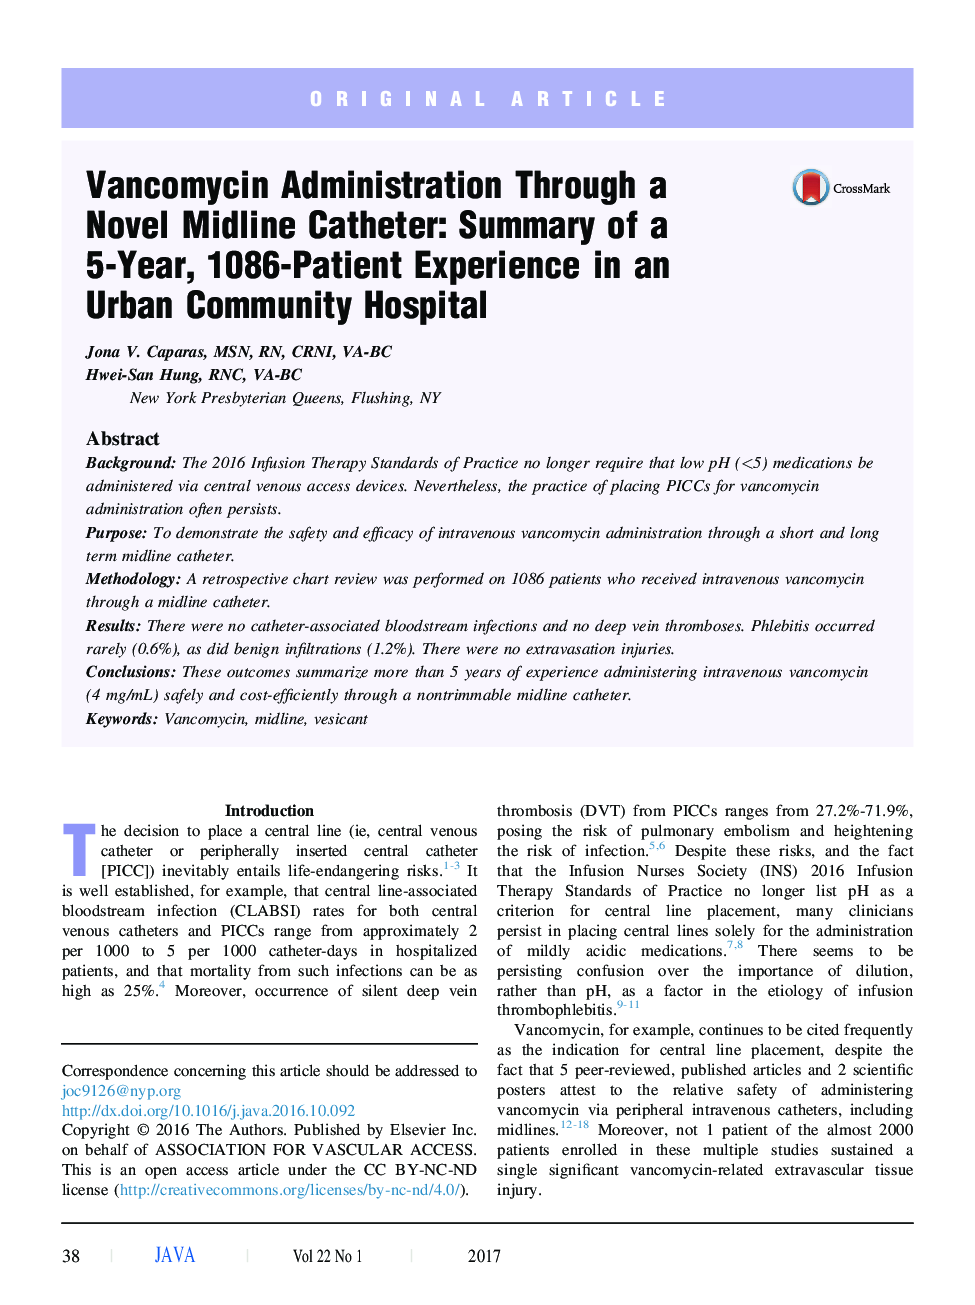 Vancomycin Administration Through a Novel Midline Catheter: Summary of a 5-Year, 1086-Patient Experience in an Urban Community Hospital